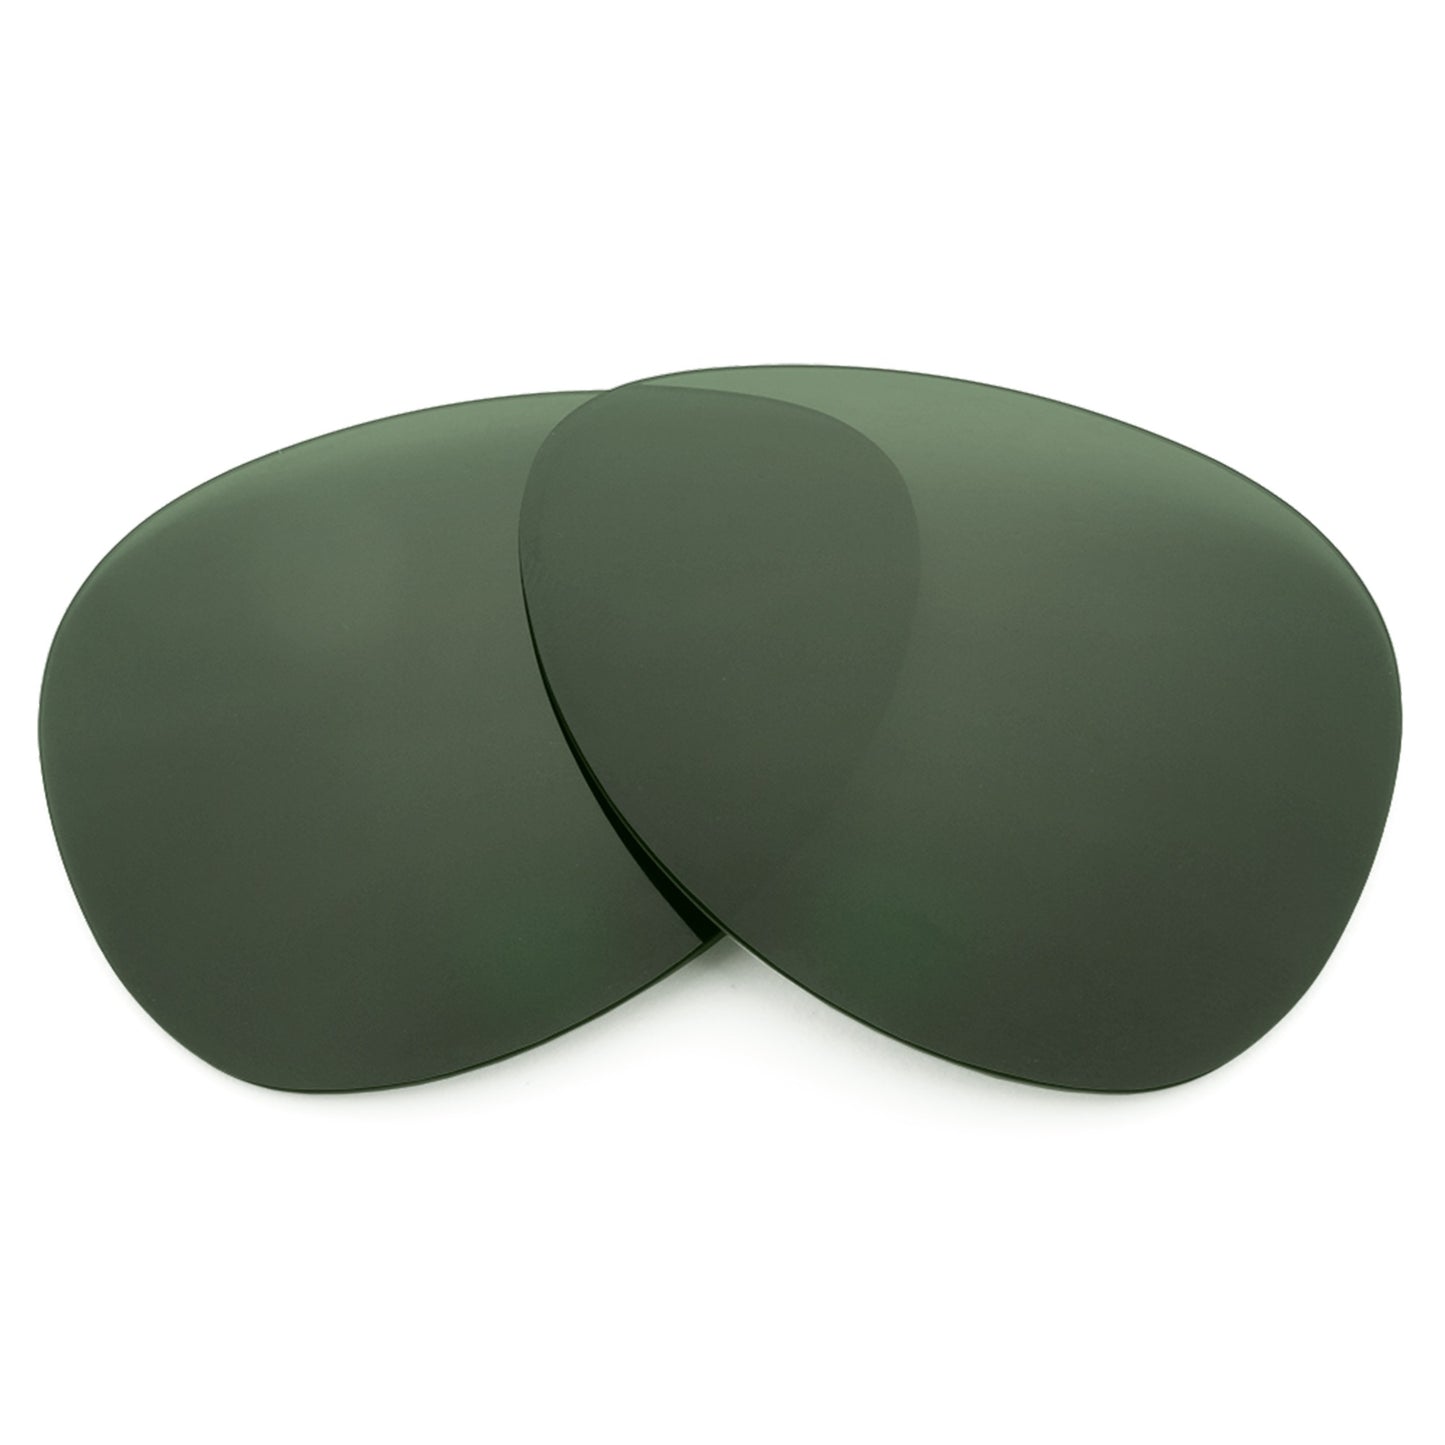 Revant replacement lenses for Ray-Ban RB4147 56mm Elite Polarized Gray Green